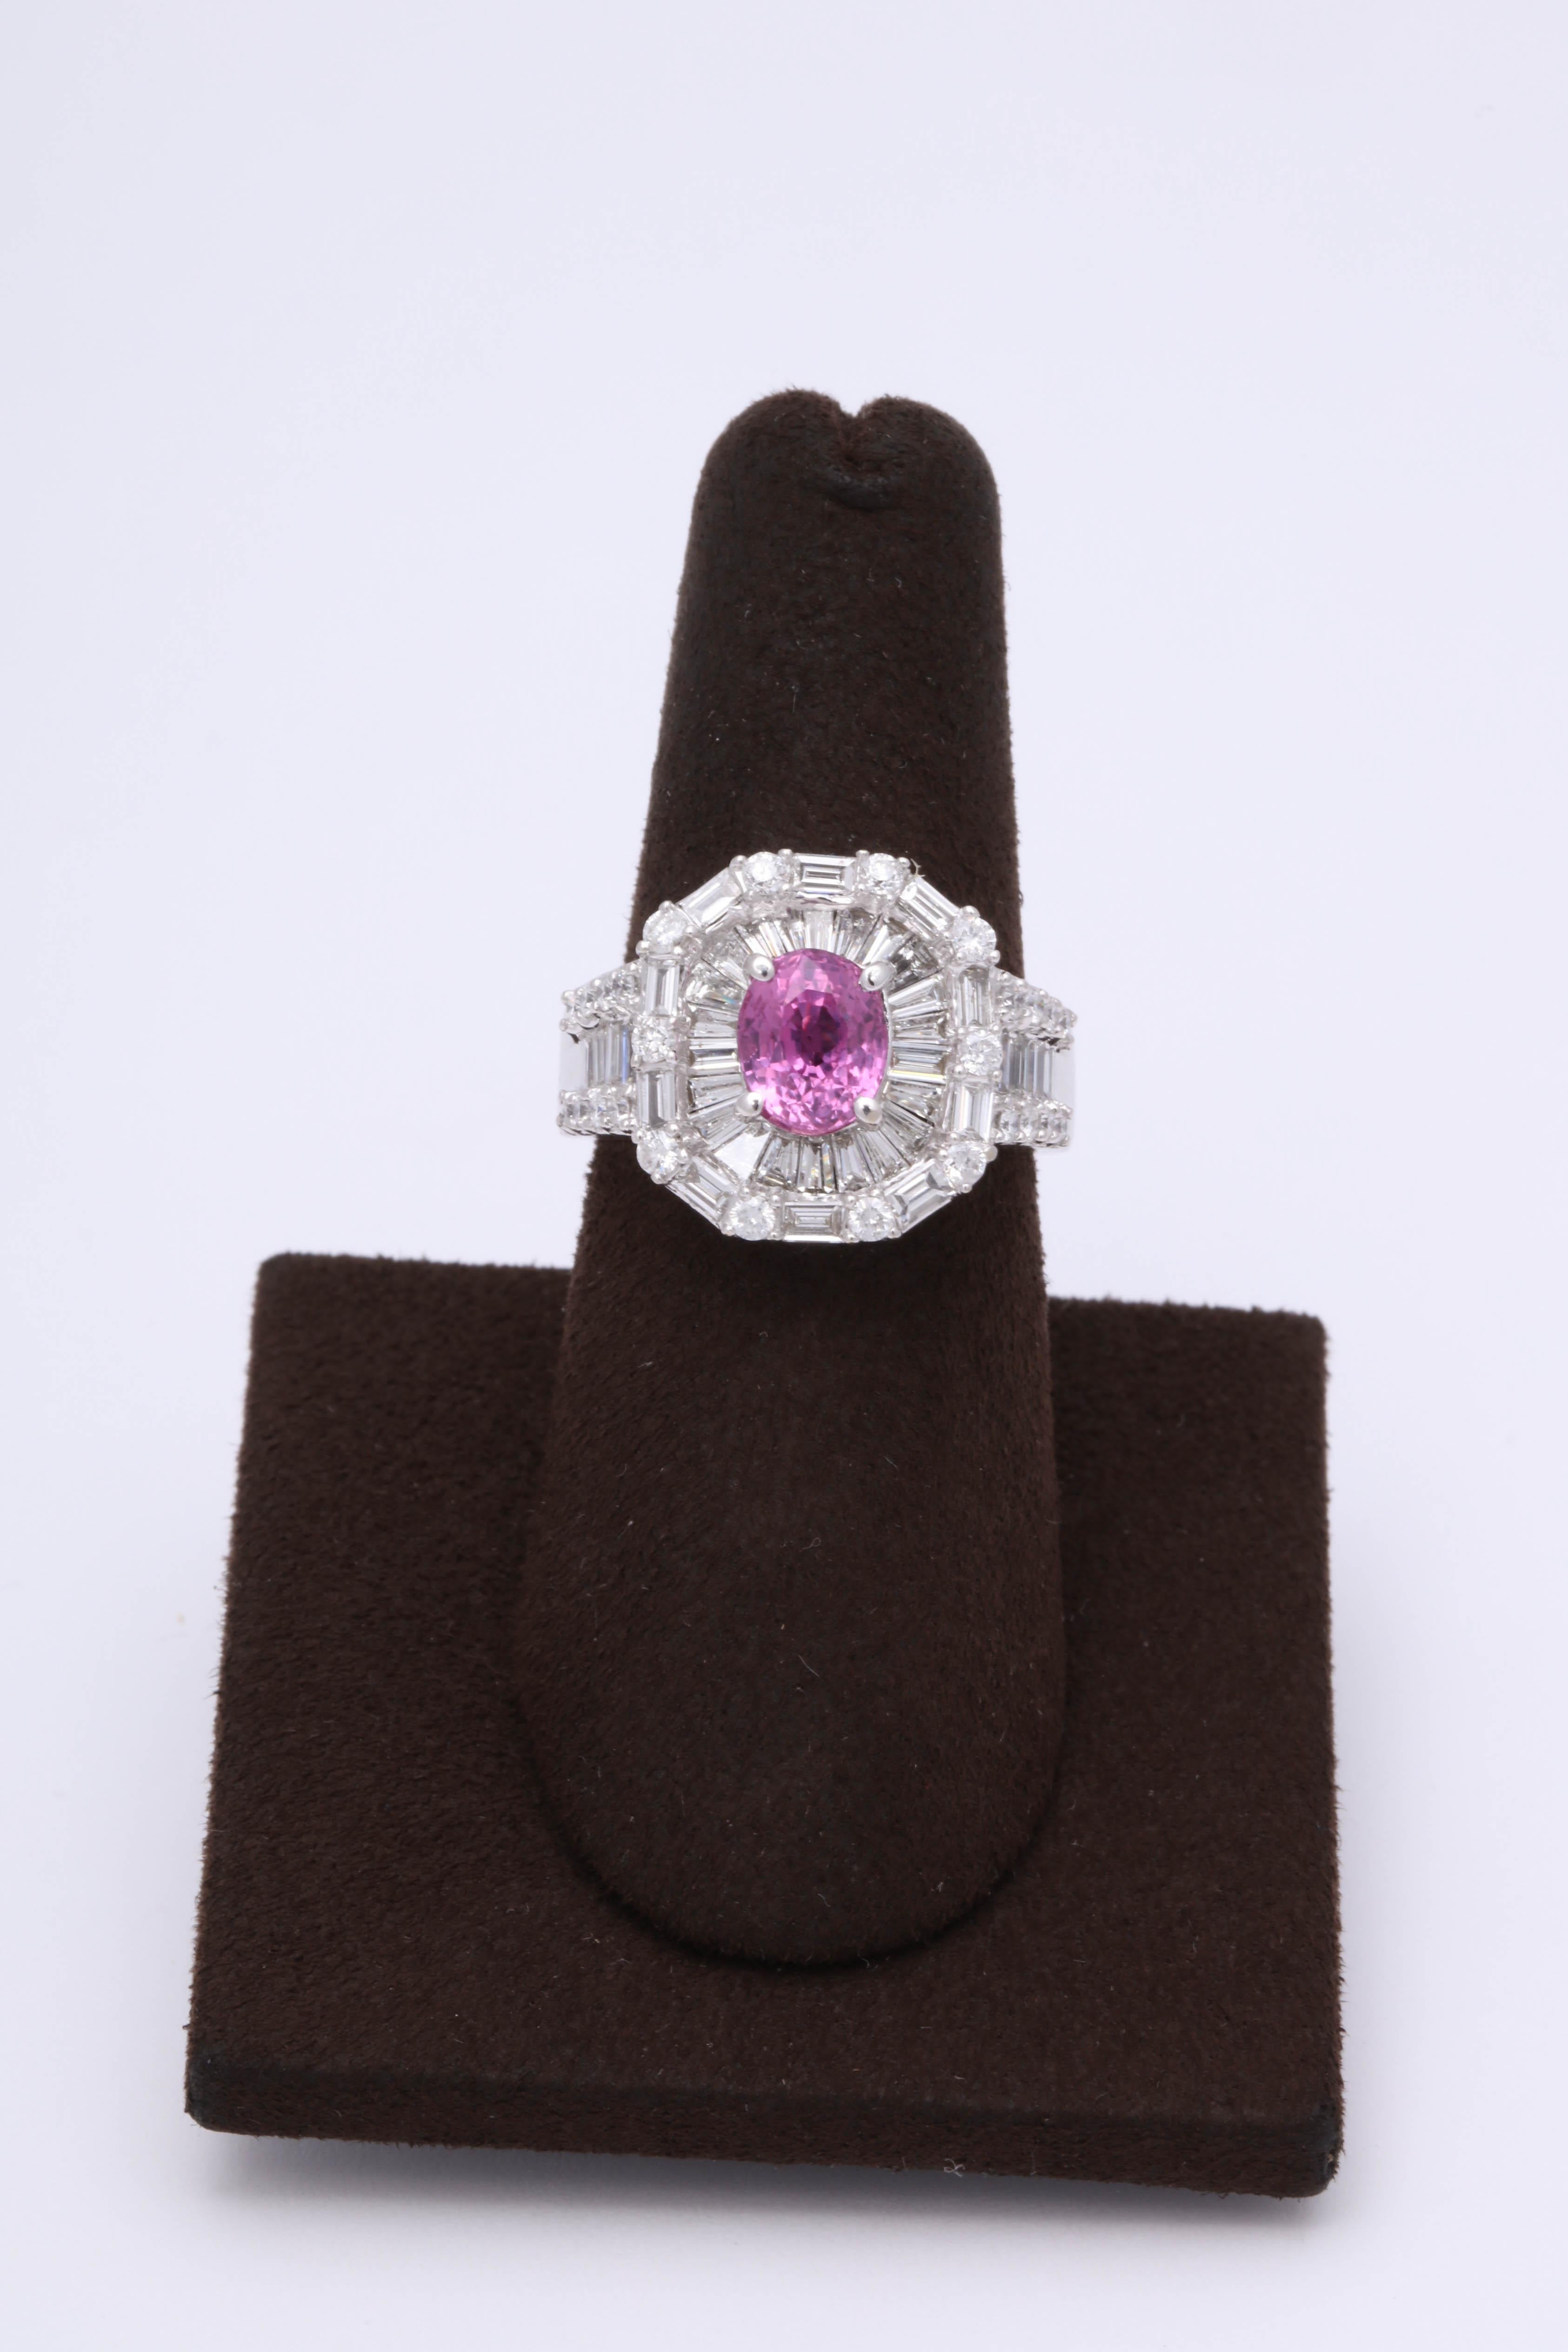 

A vibrant and vivid pink sapphire center stone surrounded by baguette and round cut diamonds.

1.82 carat center Pink Sapphire Oval. 

1.66 carats of F VS round and baguette cut diamonds.

18k white gold 

Currently a size 6.5 but can be easily